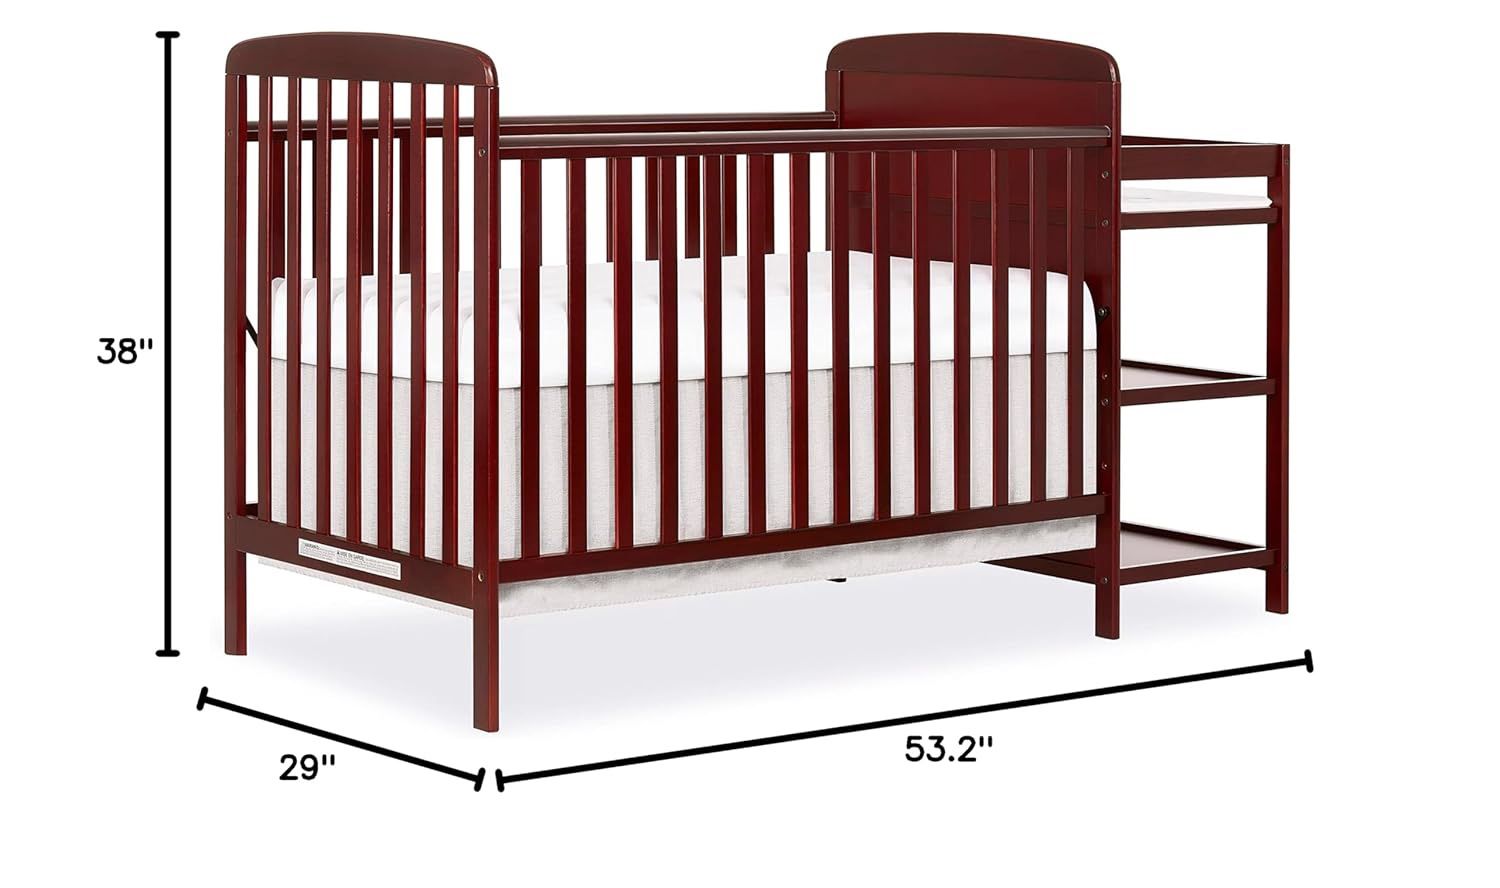 Anna 3-In-1 Full-Size Crib And Changing Table Combo In Cherry, Greenguard Gold Certified, Non-Toxic Finishes, Includes 1" Changing Pad, Wooden Nursery